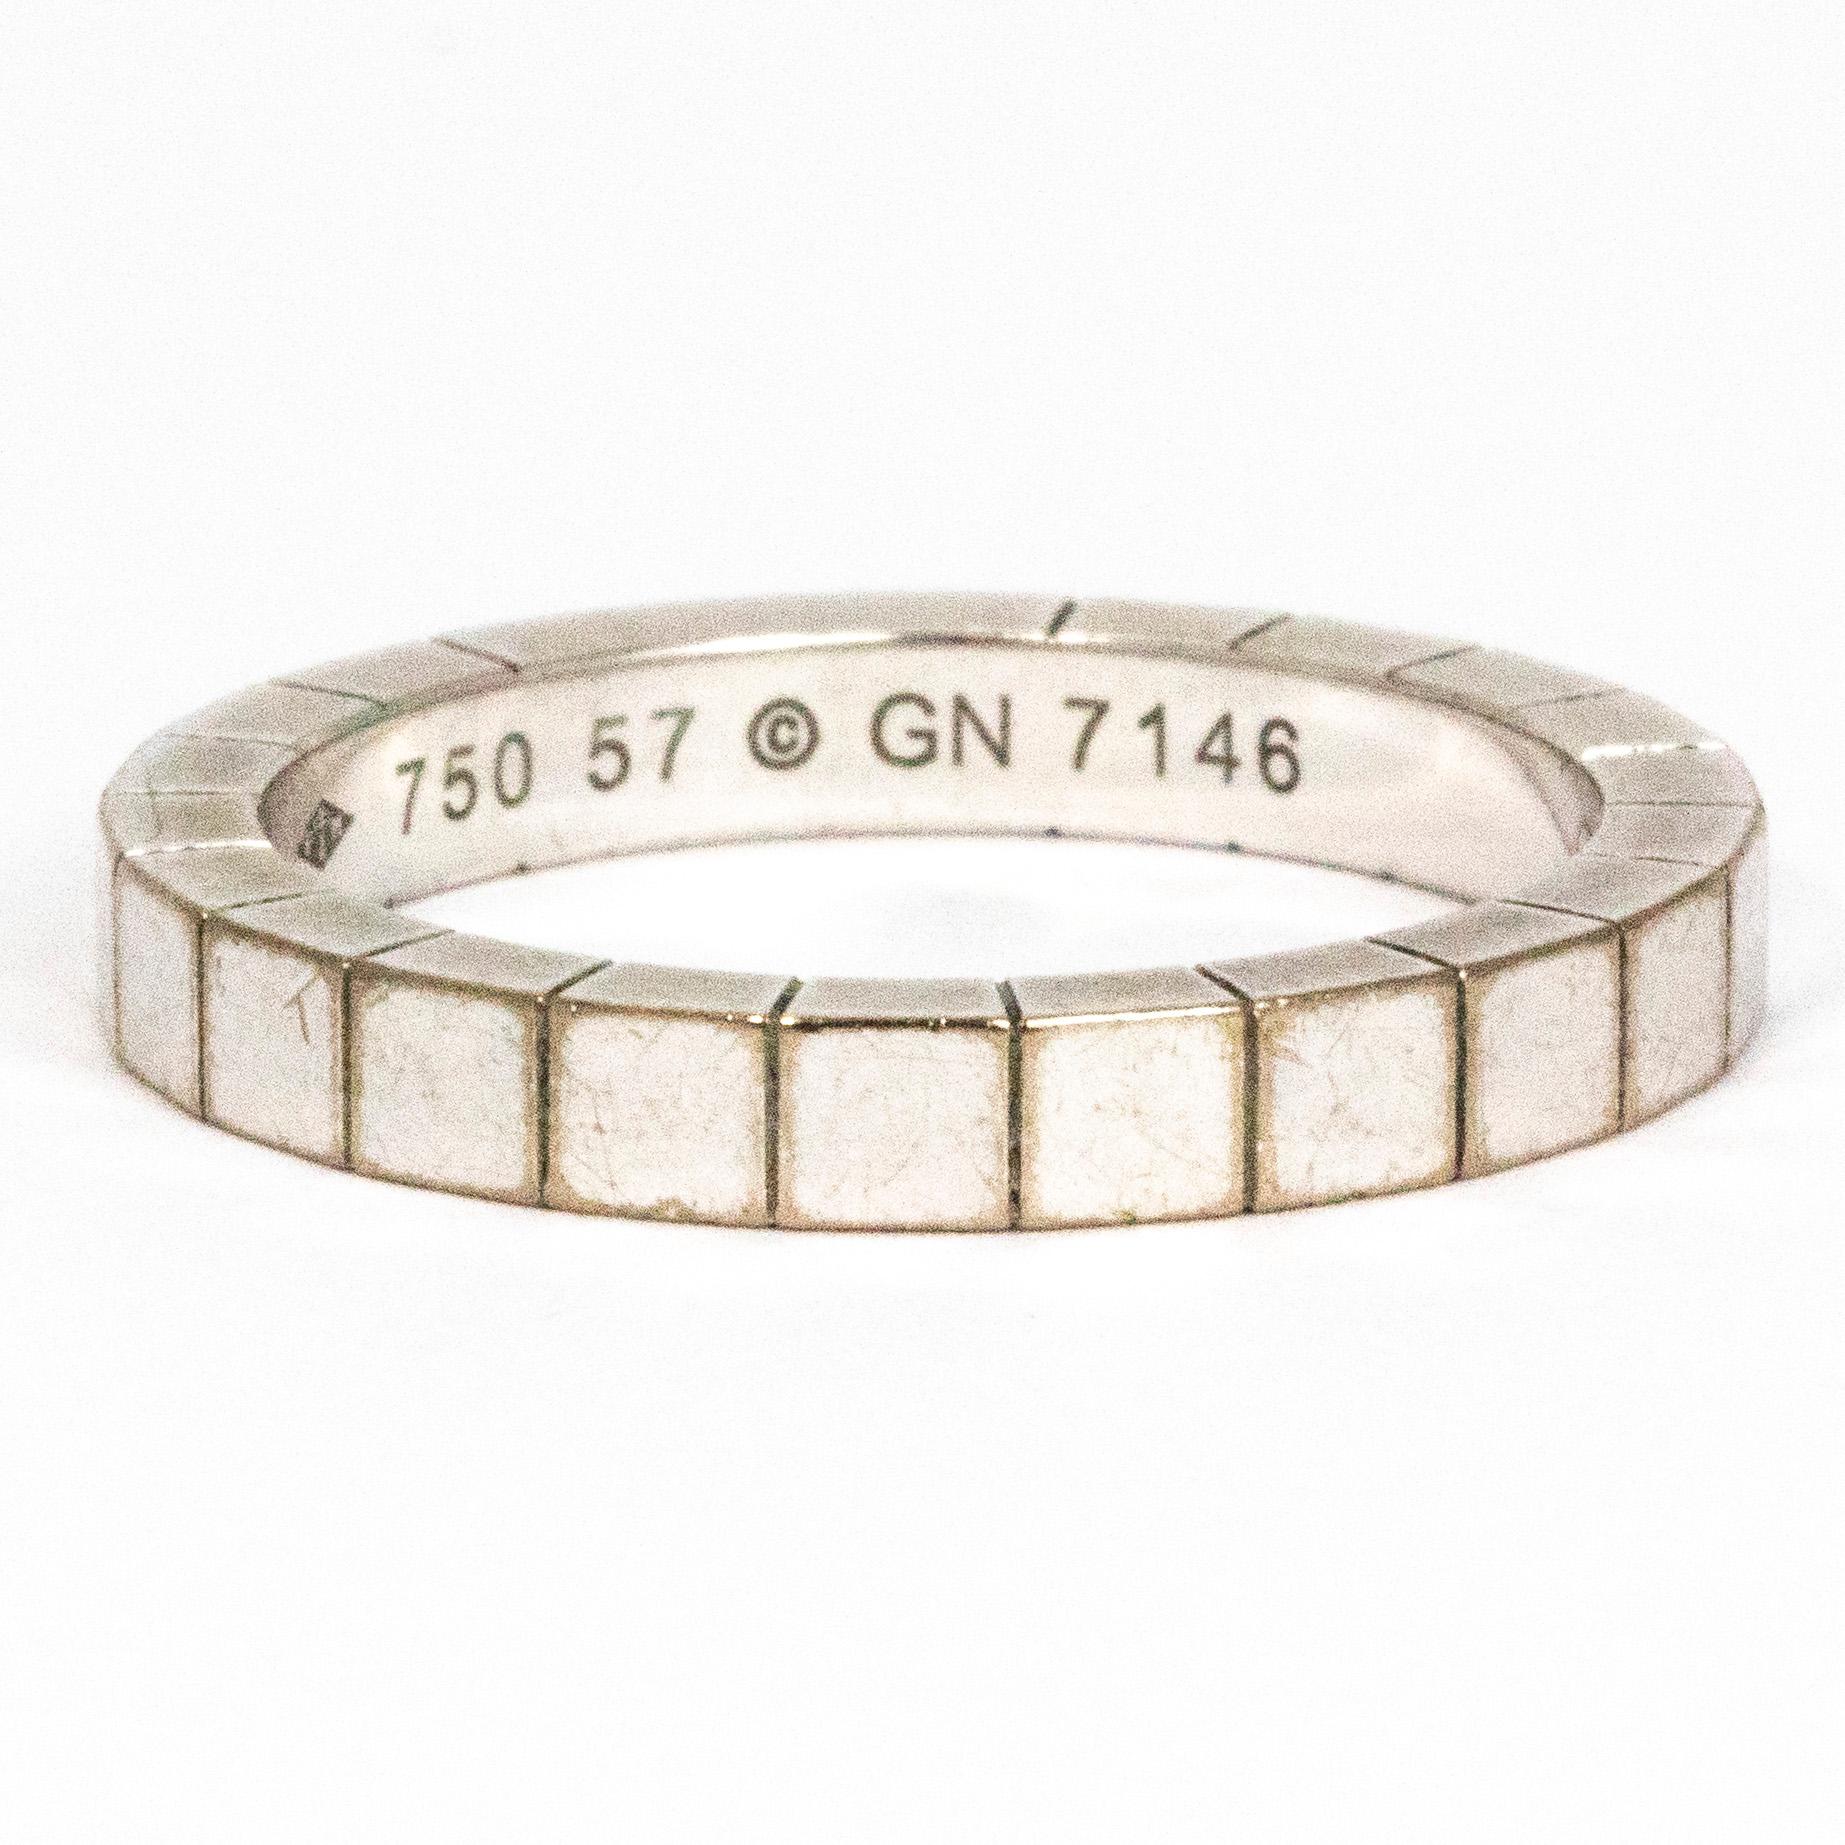 This gorgeous Ring by Cartier is from their Lanieres collection and features their signature Lanieres design made in 18k White Gold. On the inside of the band is the Cartier logo GN7148. This design is modern and so stylish with the signature on the